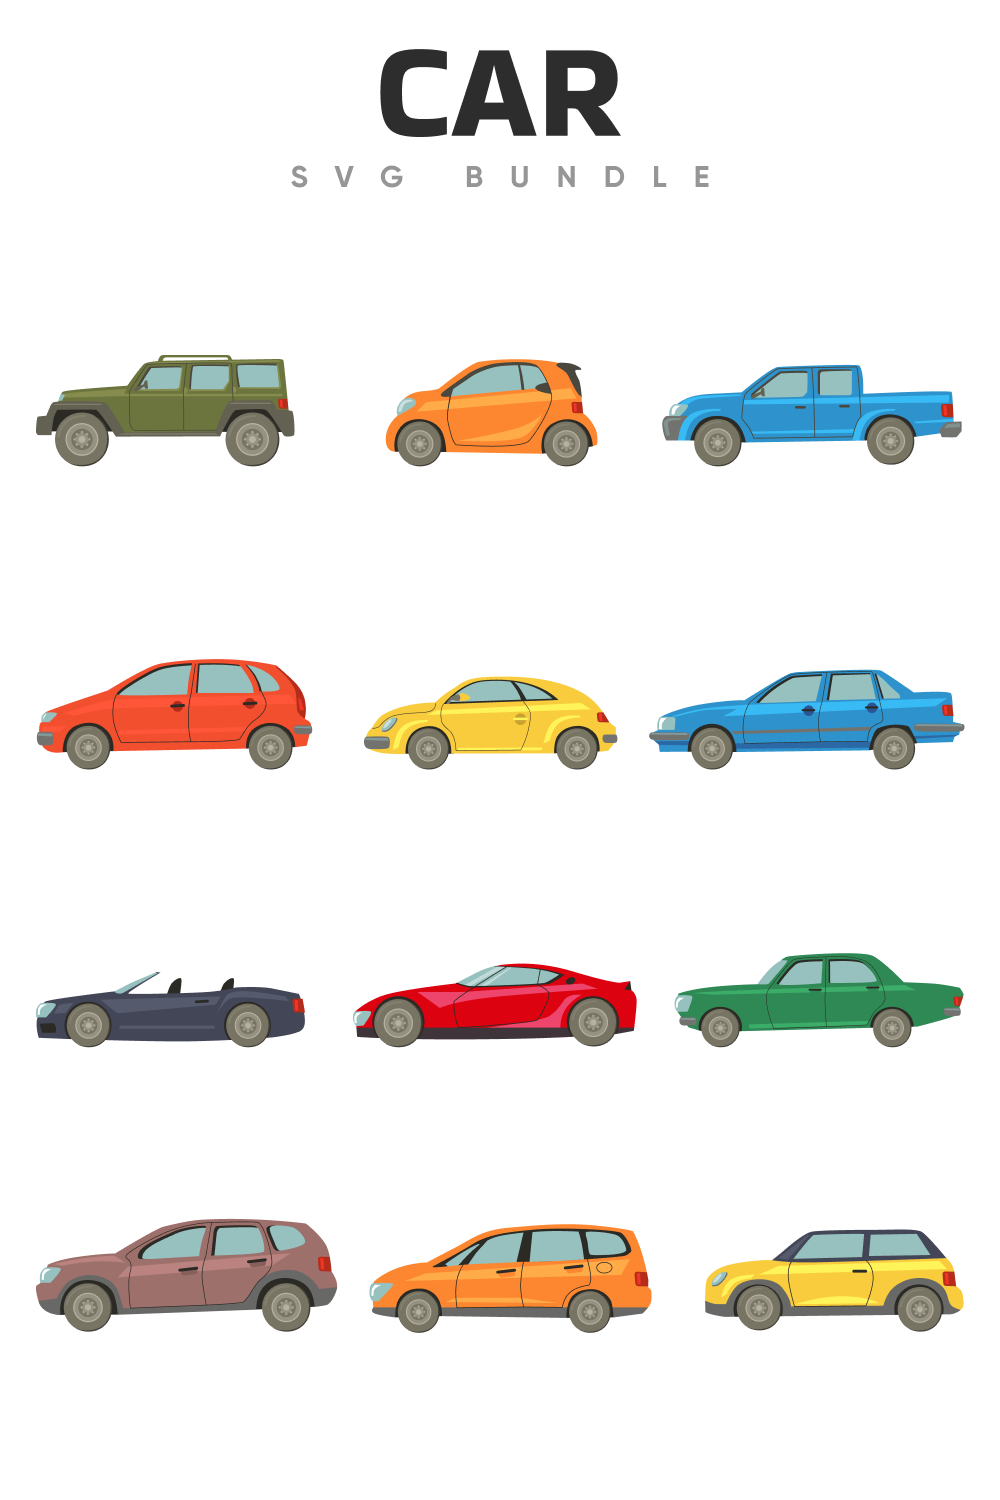 So many colorful cars for you.